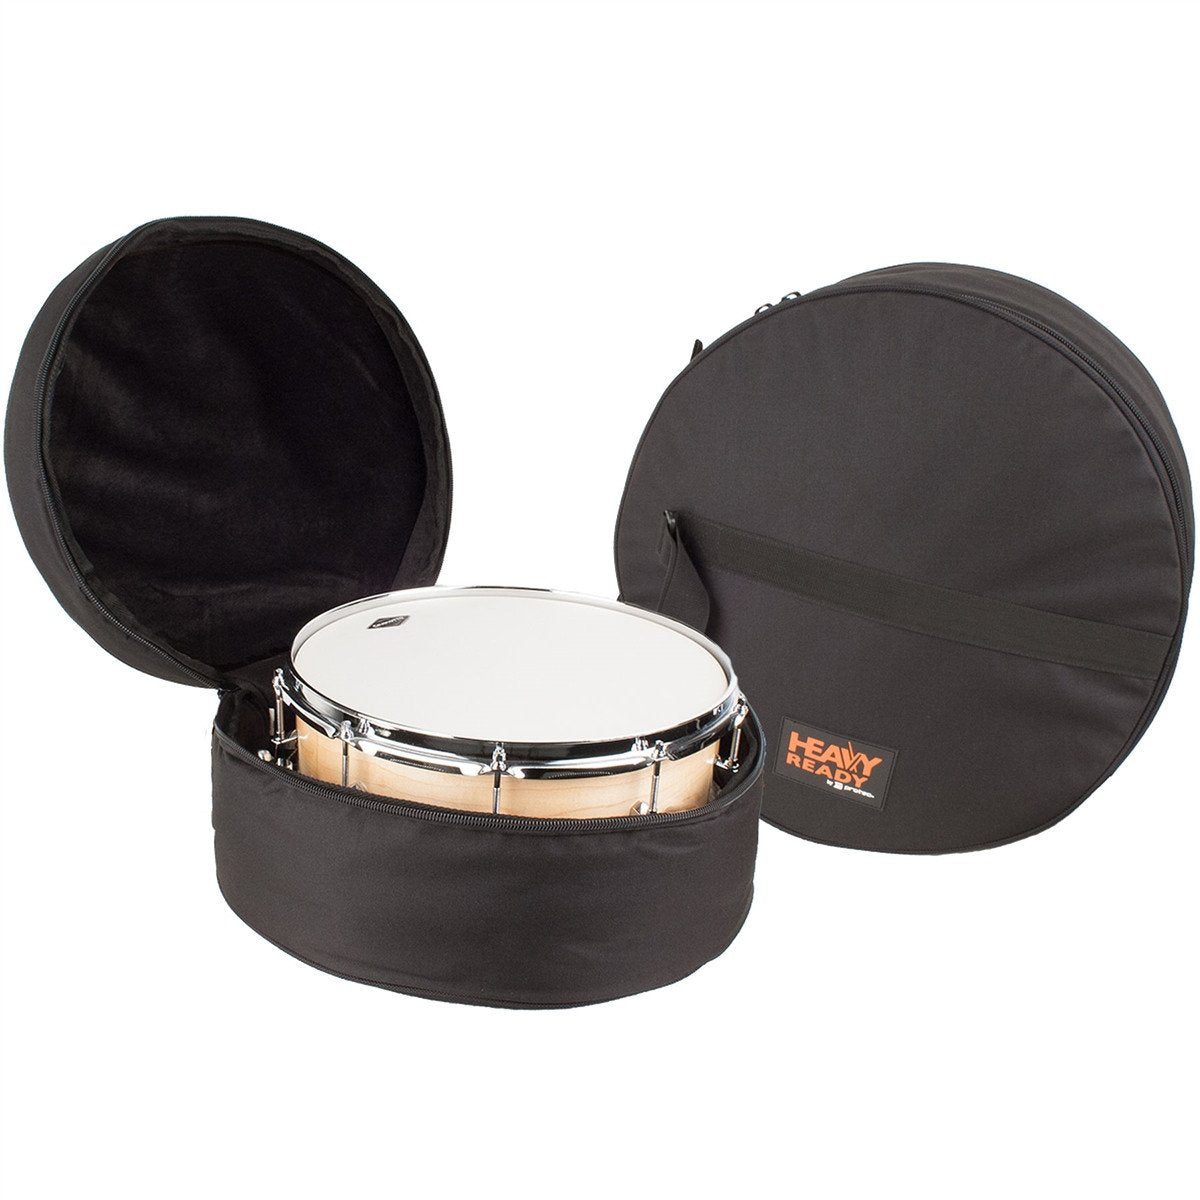 Protec - HR6514 Padded Snare Bag 6.5&quot; x 14&quot;  (Heavy Ready Series)